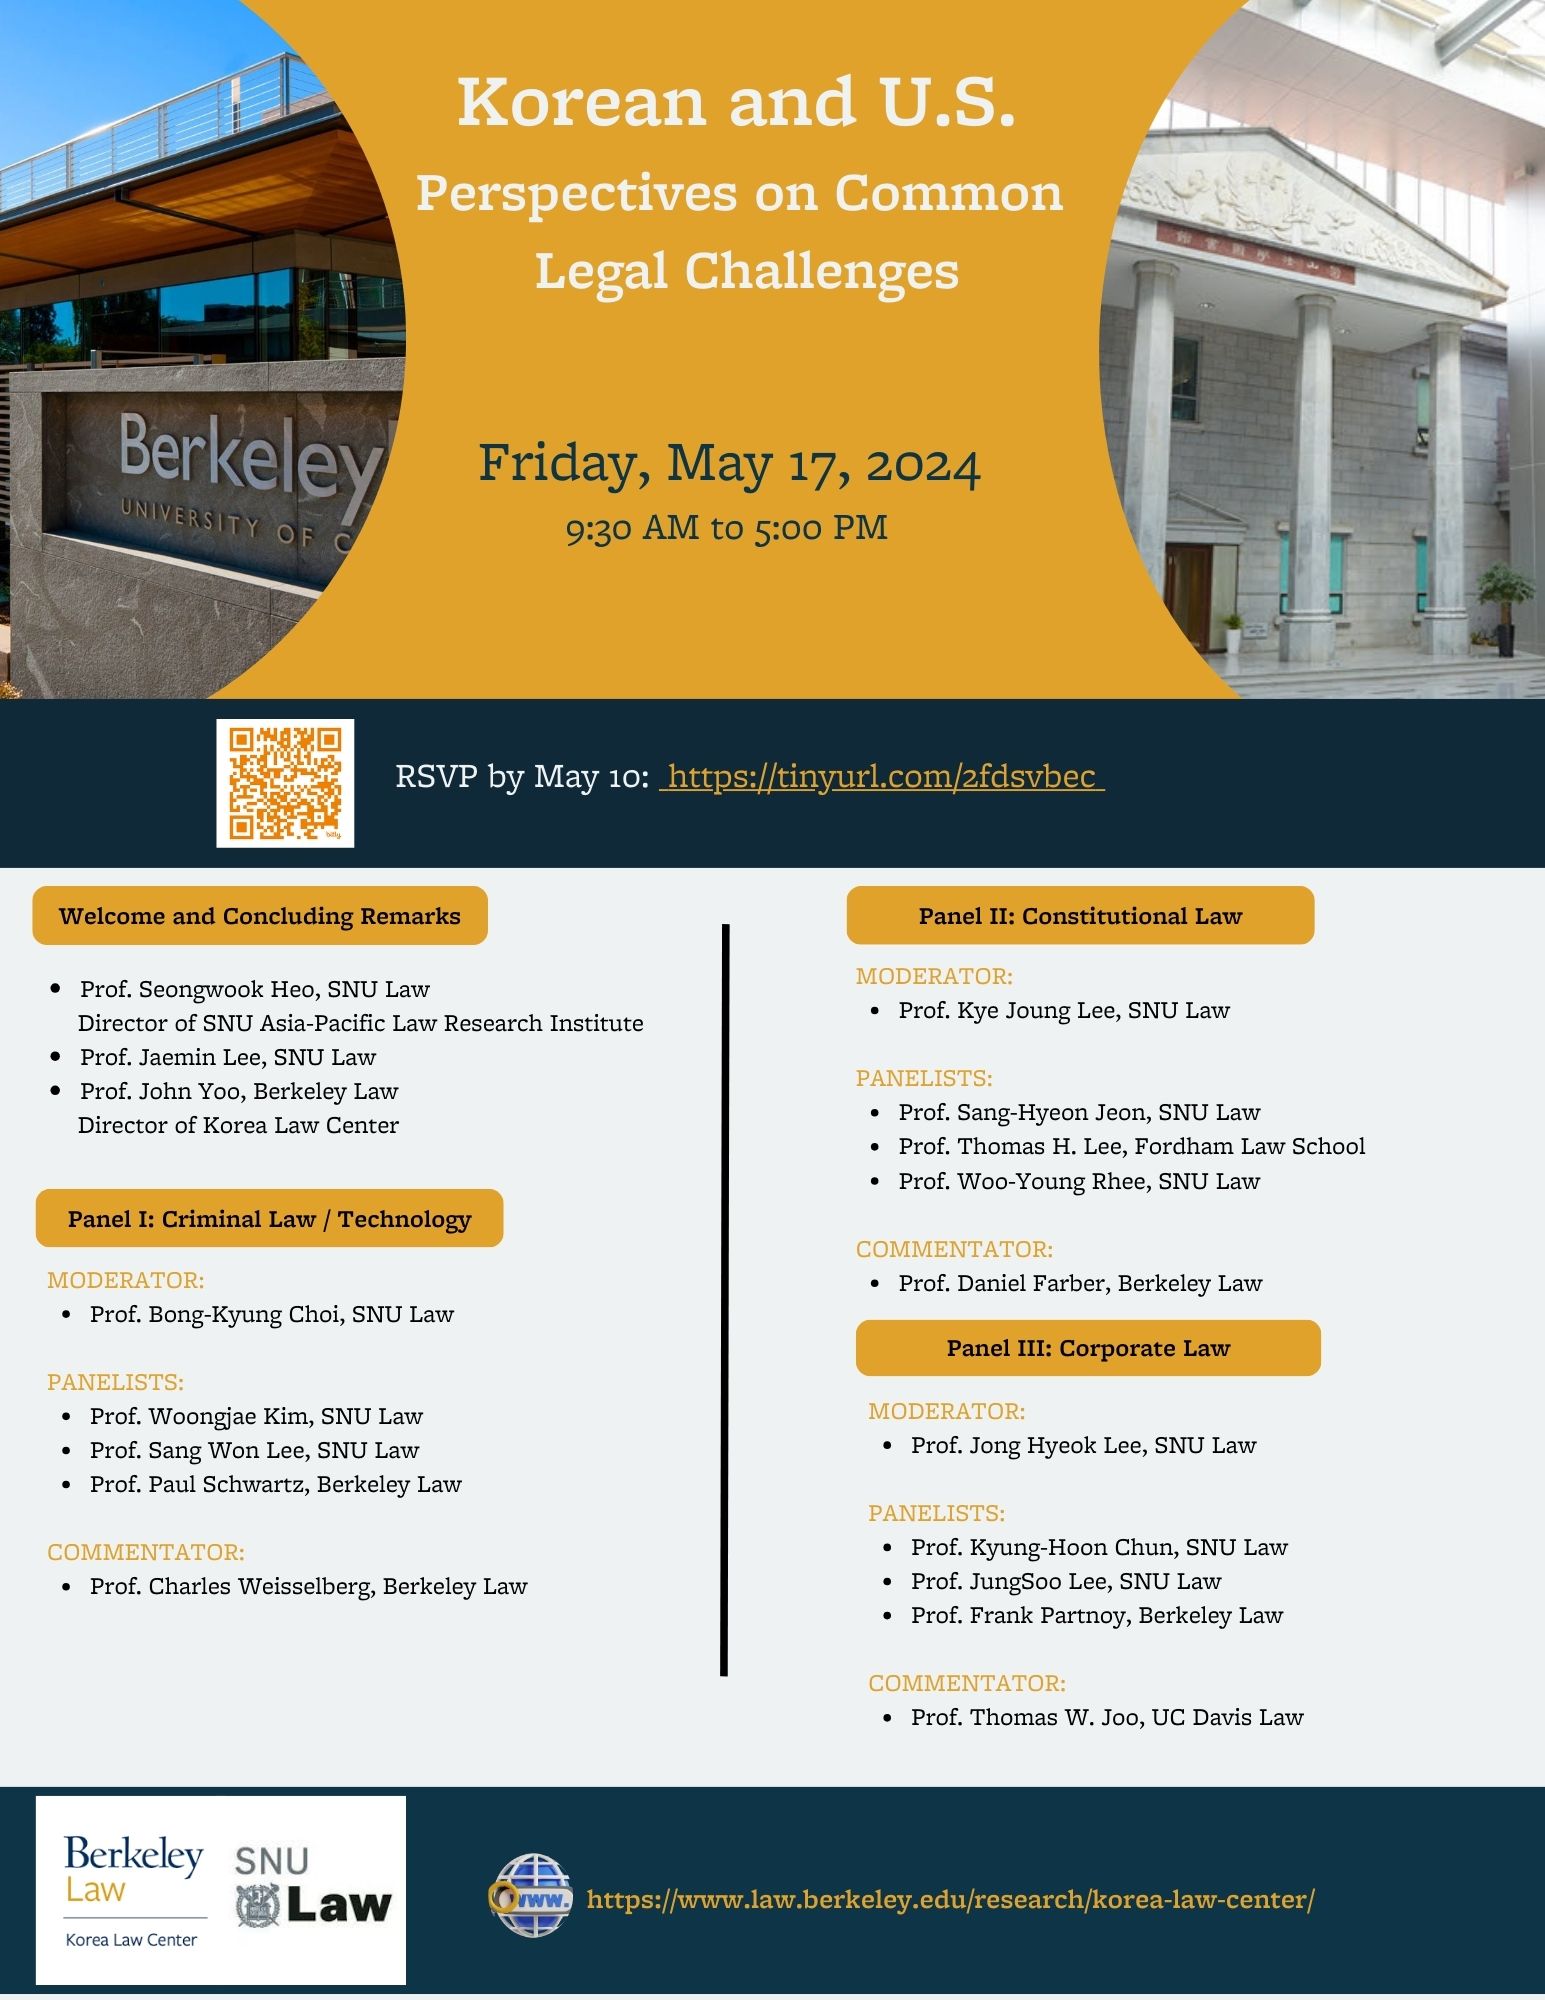 Korea and US Perspectives on Common Legal Challenges Event Flyer on Fri May 17th from 9:30 am to 5 pm